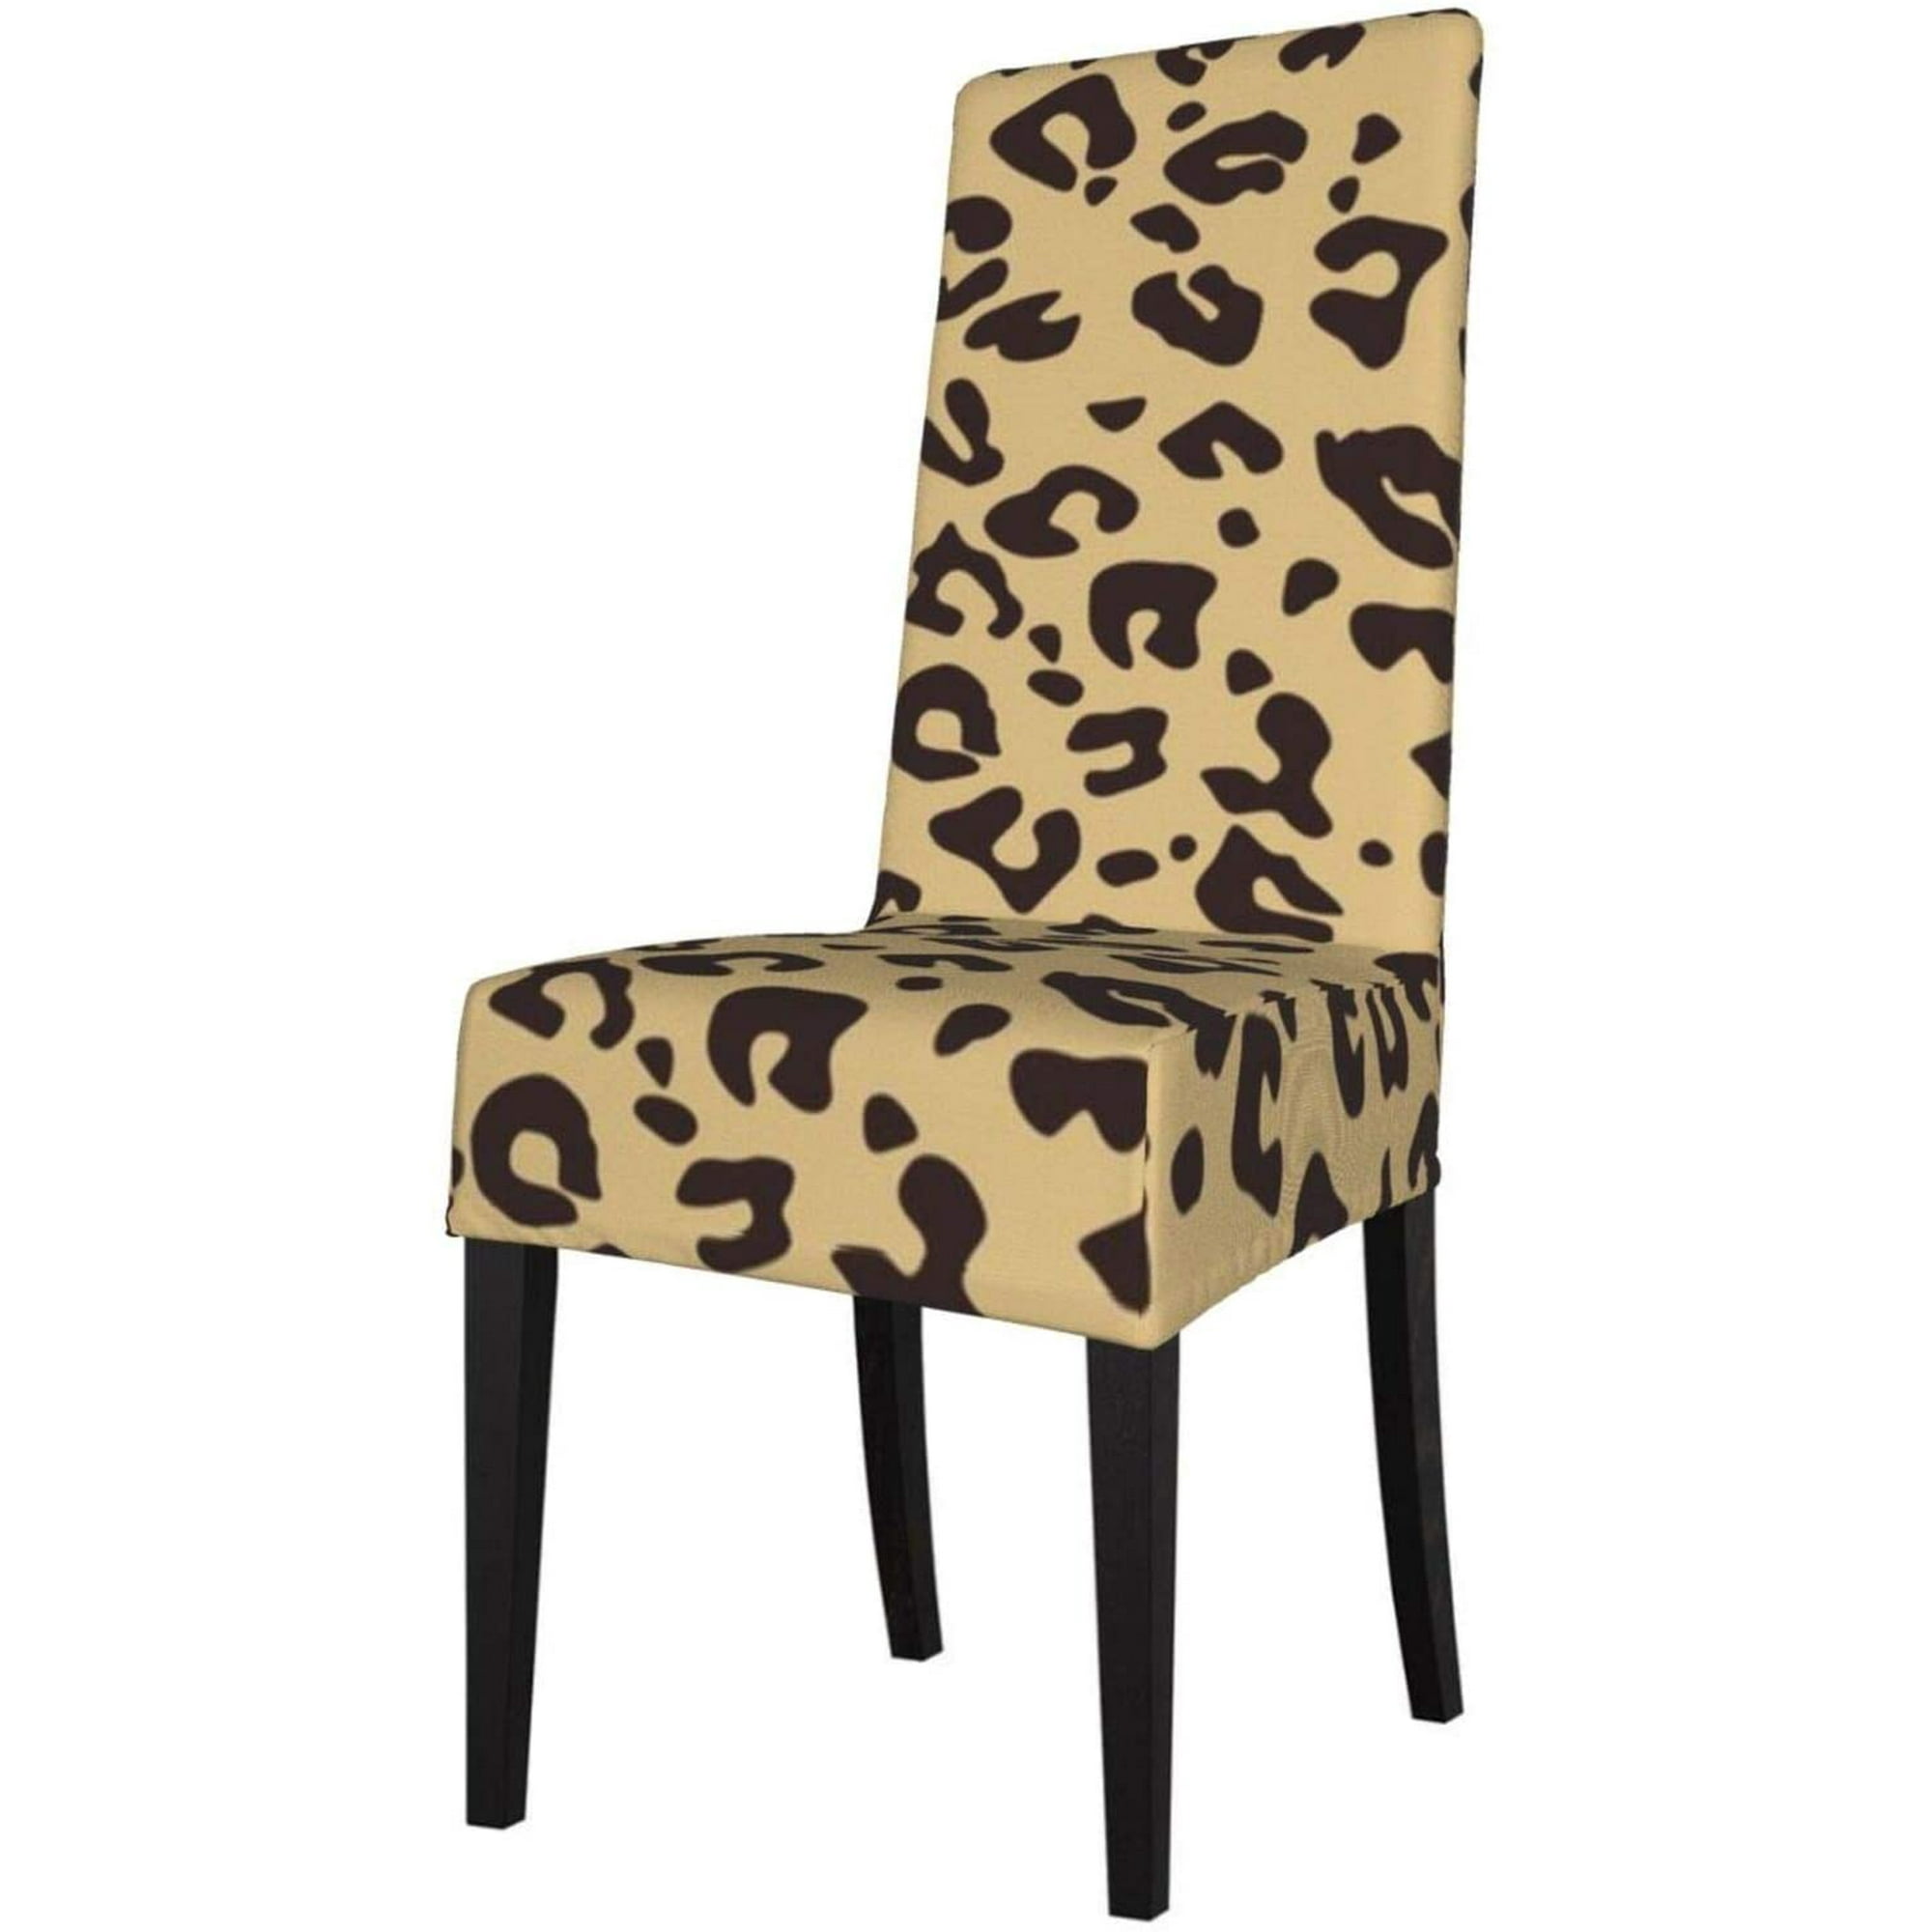 Stretch Chair Cover Dining, Leopard Print Parson Chair Covers